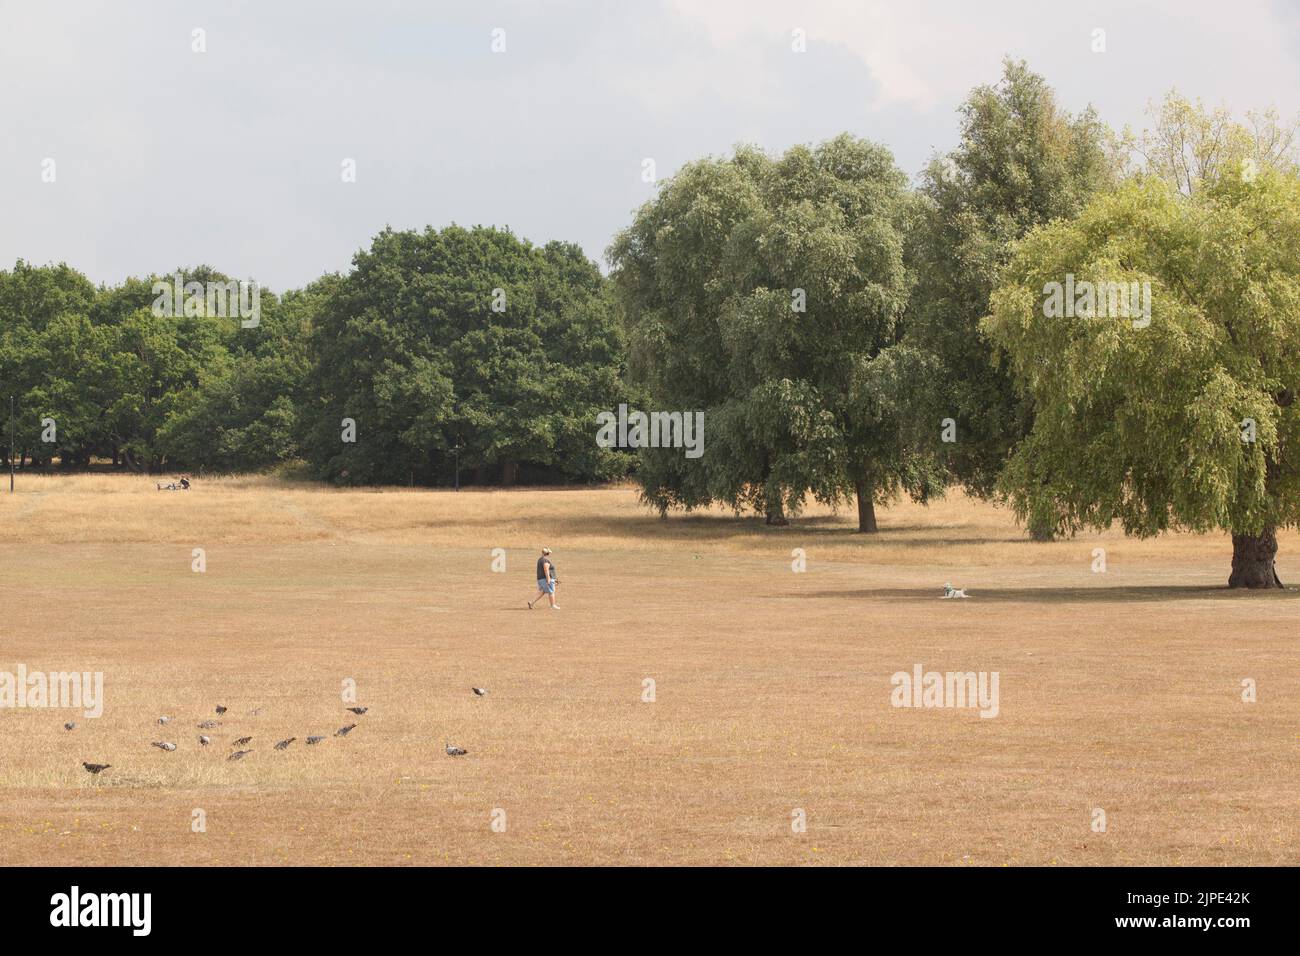 London, UK, 17 August 2022: Streatham Common in South London is entirely brown as all the grass is parched due to the recent drought. Deep-rooted trees are still green but many have dropped some of their leaves to conserve their water supplies. Rain storms crossed the area later that afternoon. Anna Watson/Alamy Live News Stock Photo